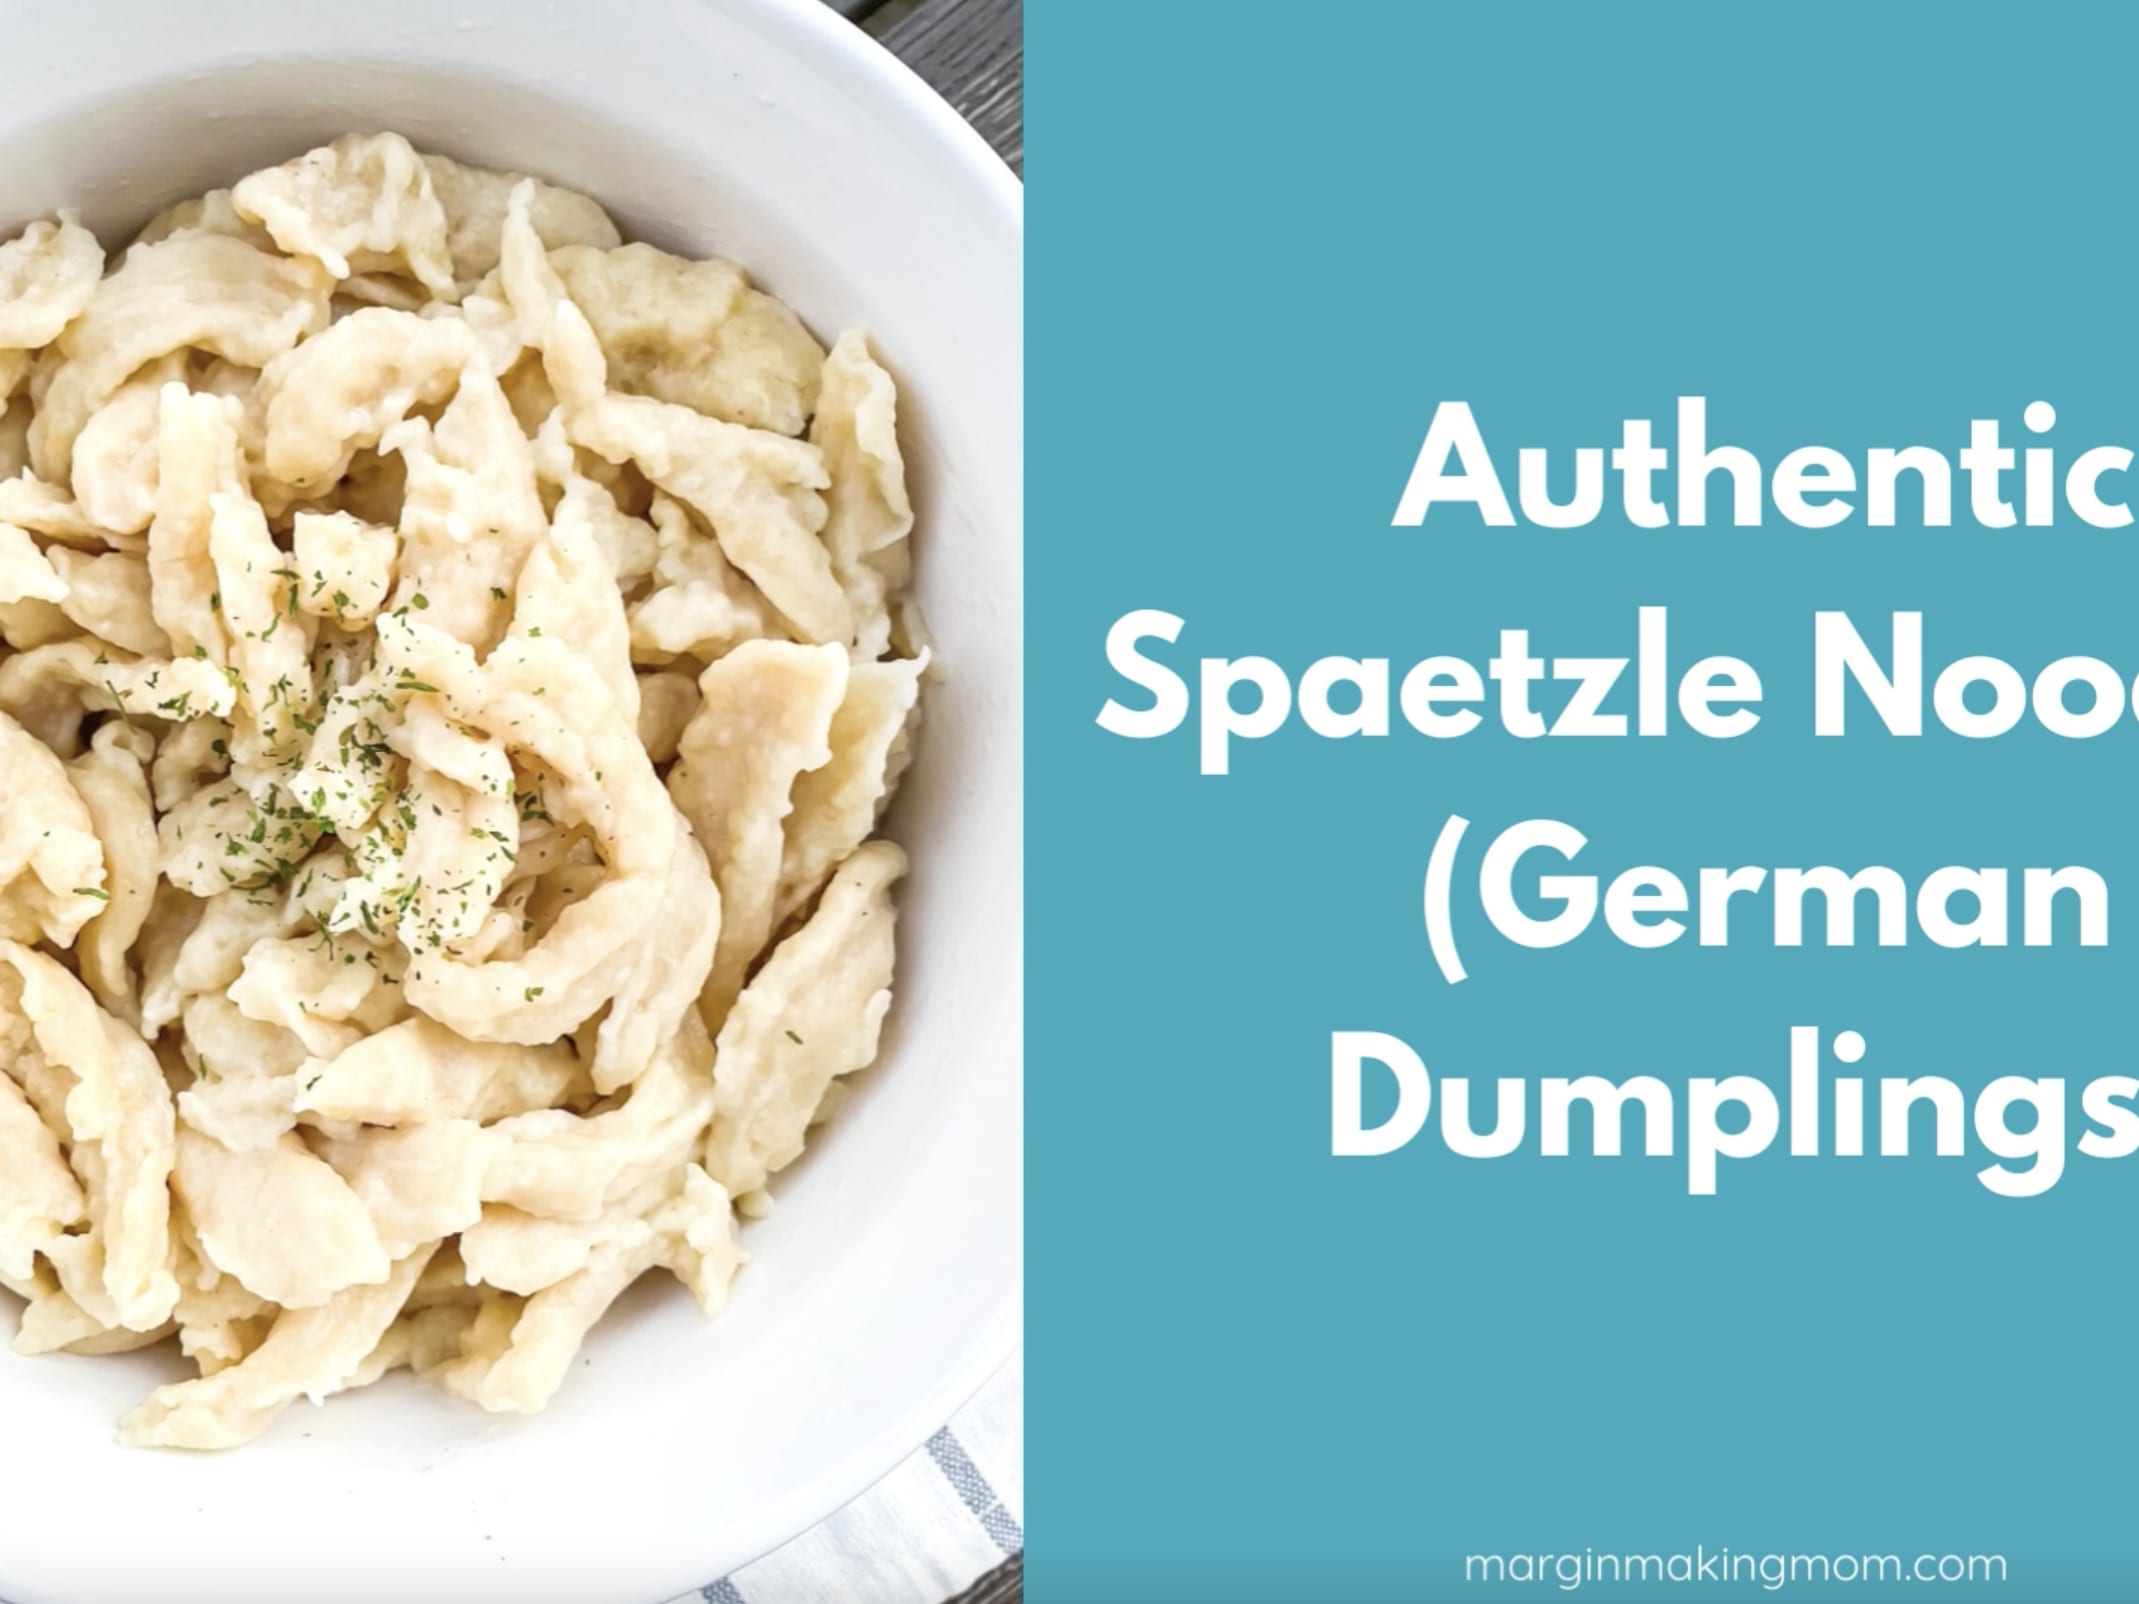 Spaetzle Is the Most Forgiving Pasta—Or Is It a Dumpling?—to Make